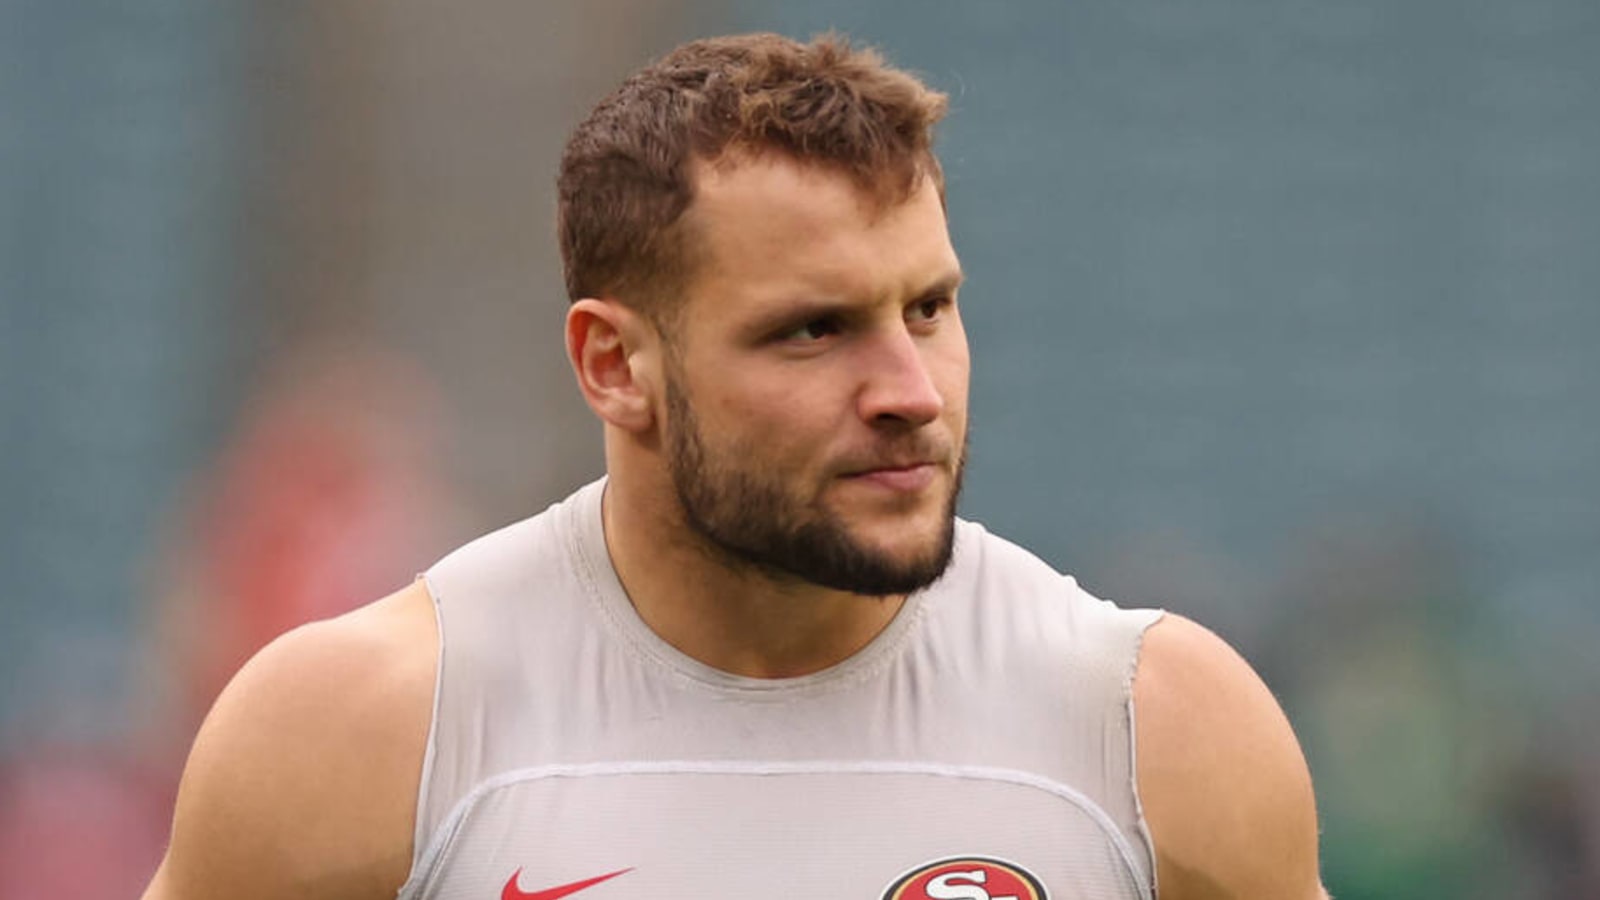 49ers DE Nick Bosa's Mom Throws Super Bowl Homecoming Party - CBS